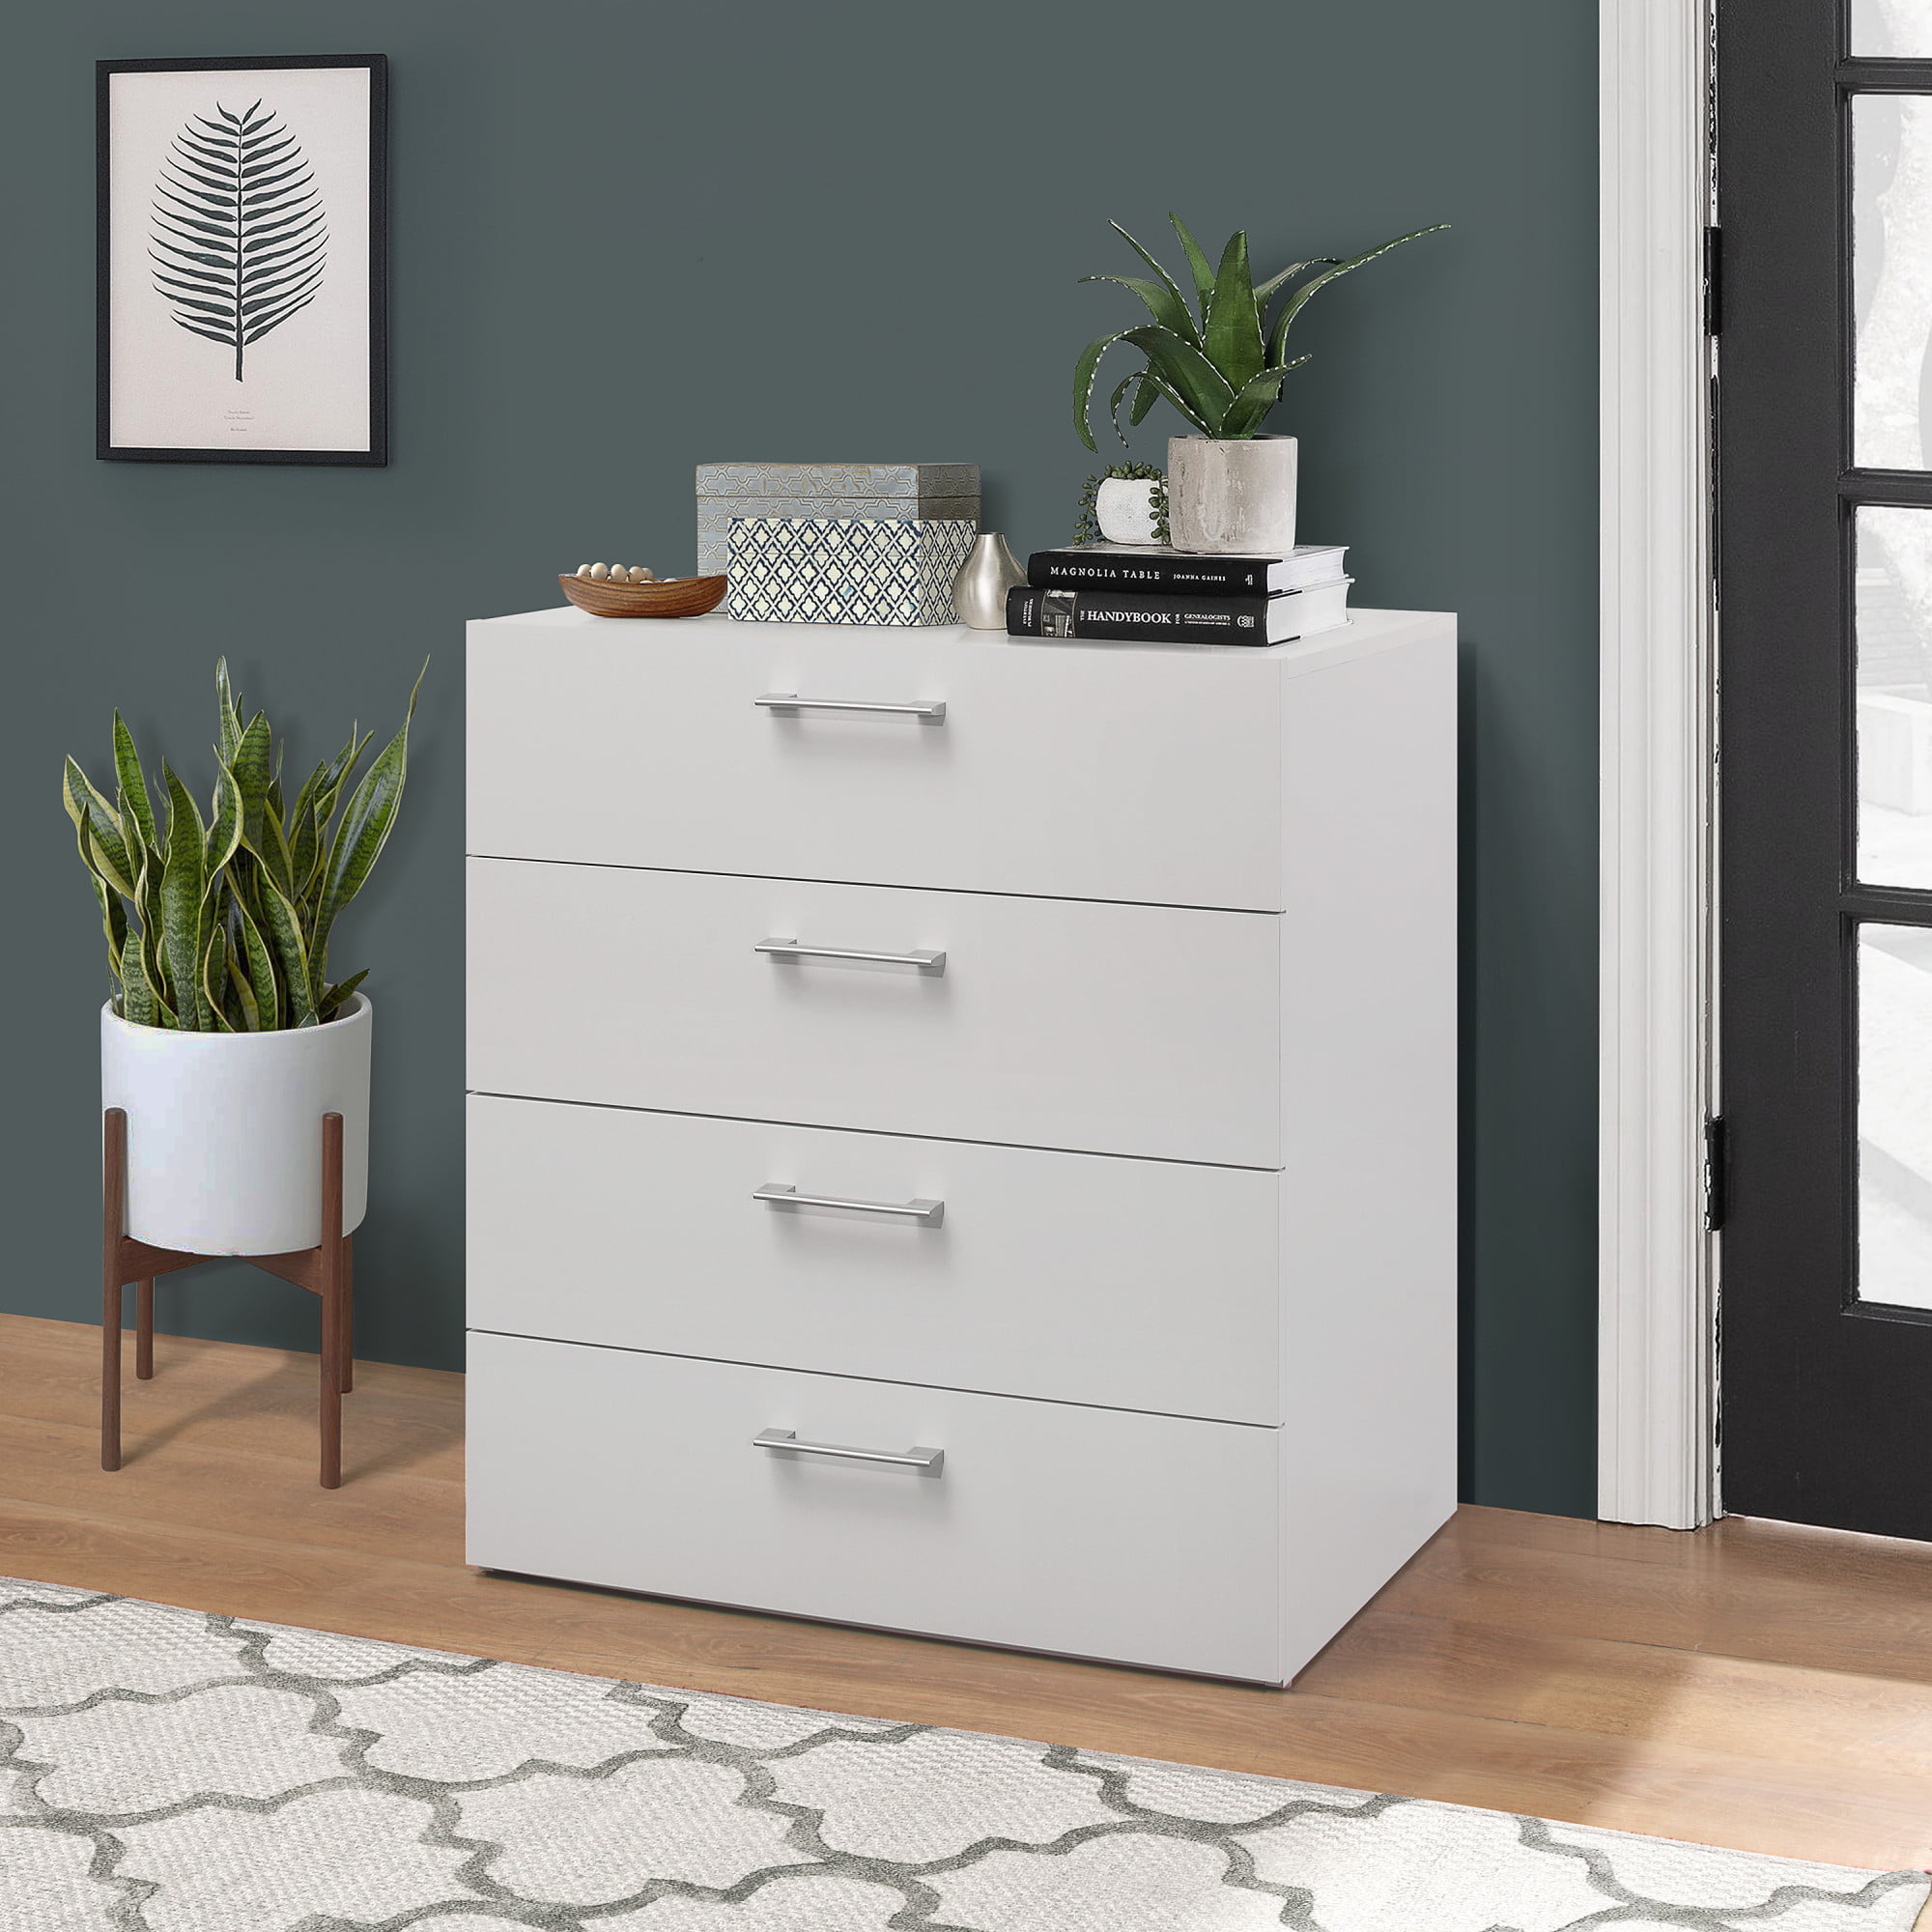 Hillsdale Living Essentials Lundy 4-Drawer Dresser (White) $78 + Free Shipping